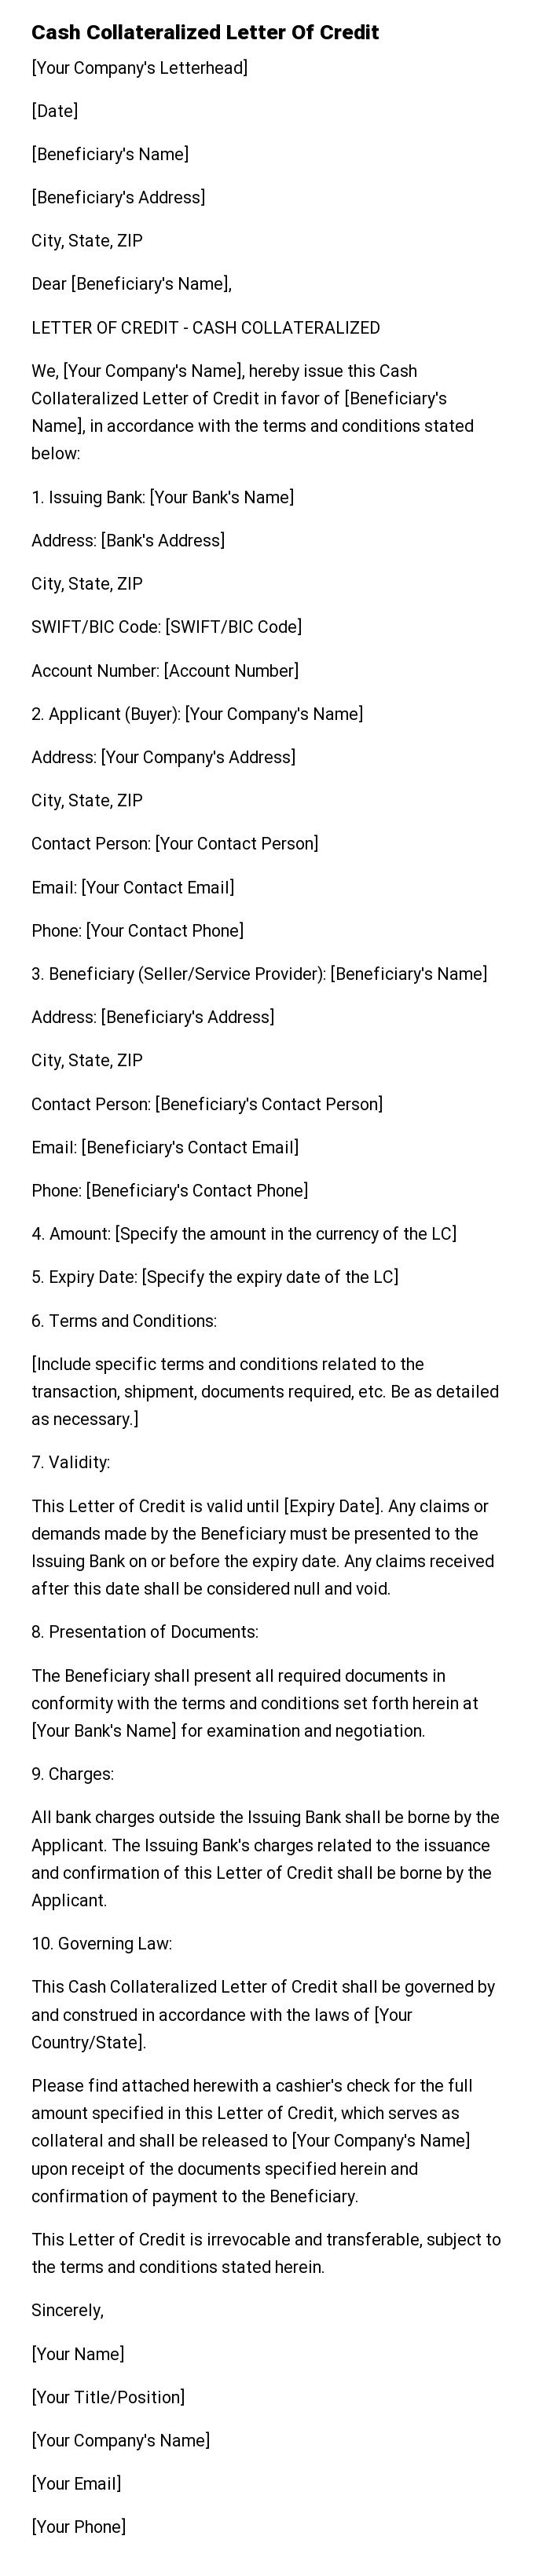 Cash Collateralized Letter Of Credit